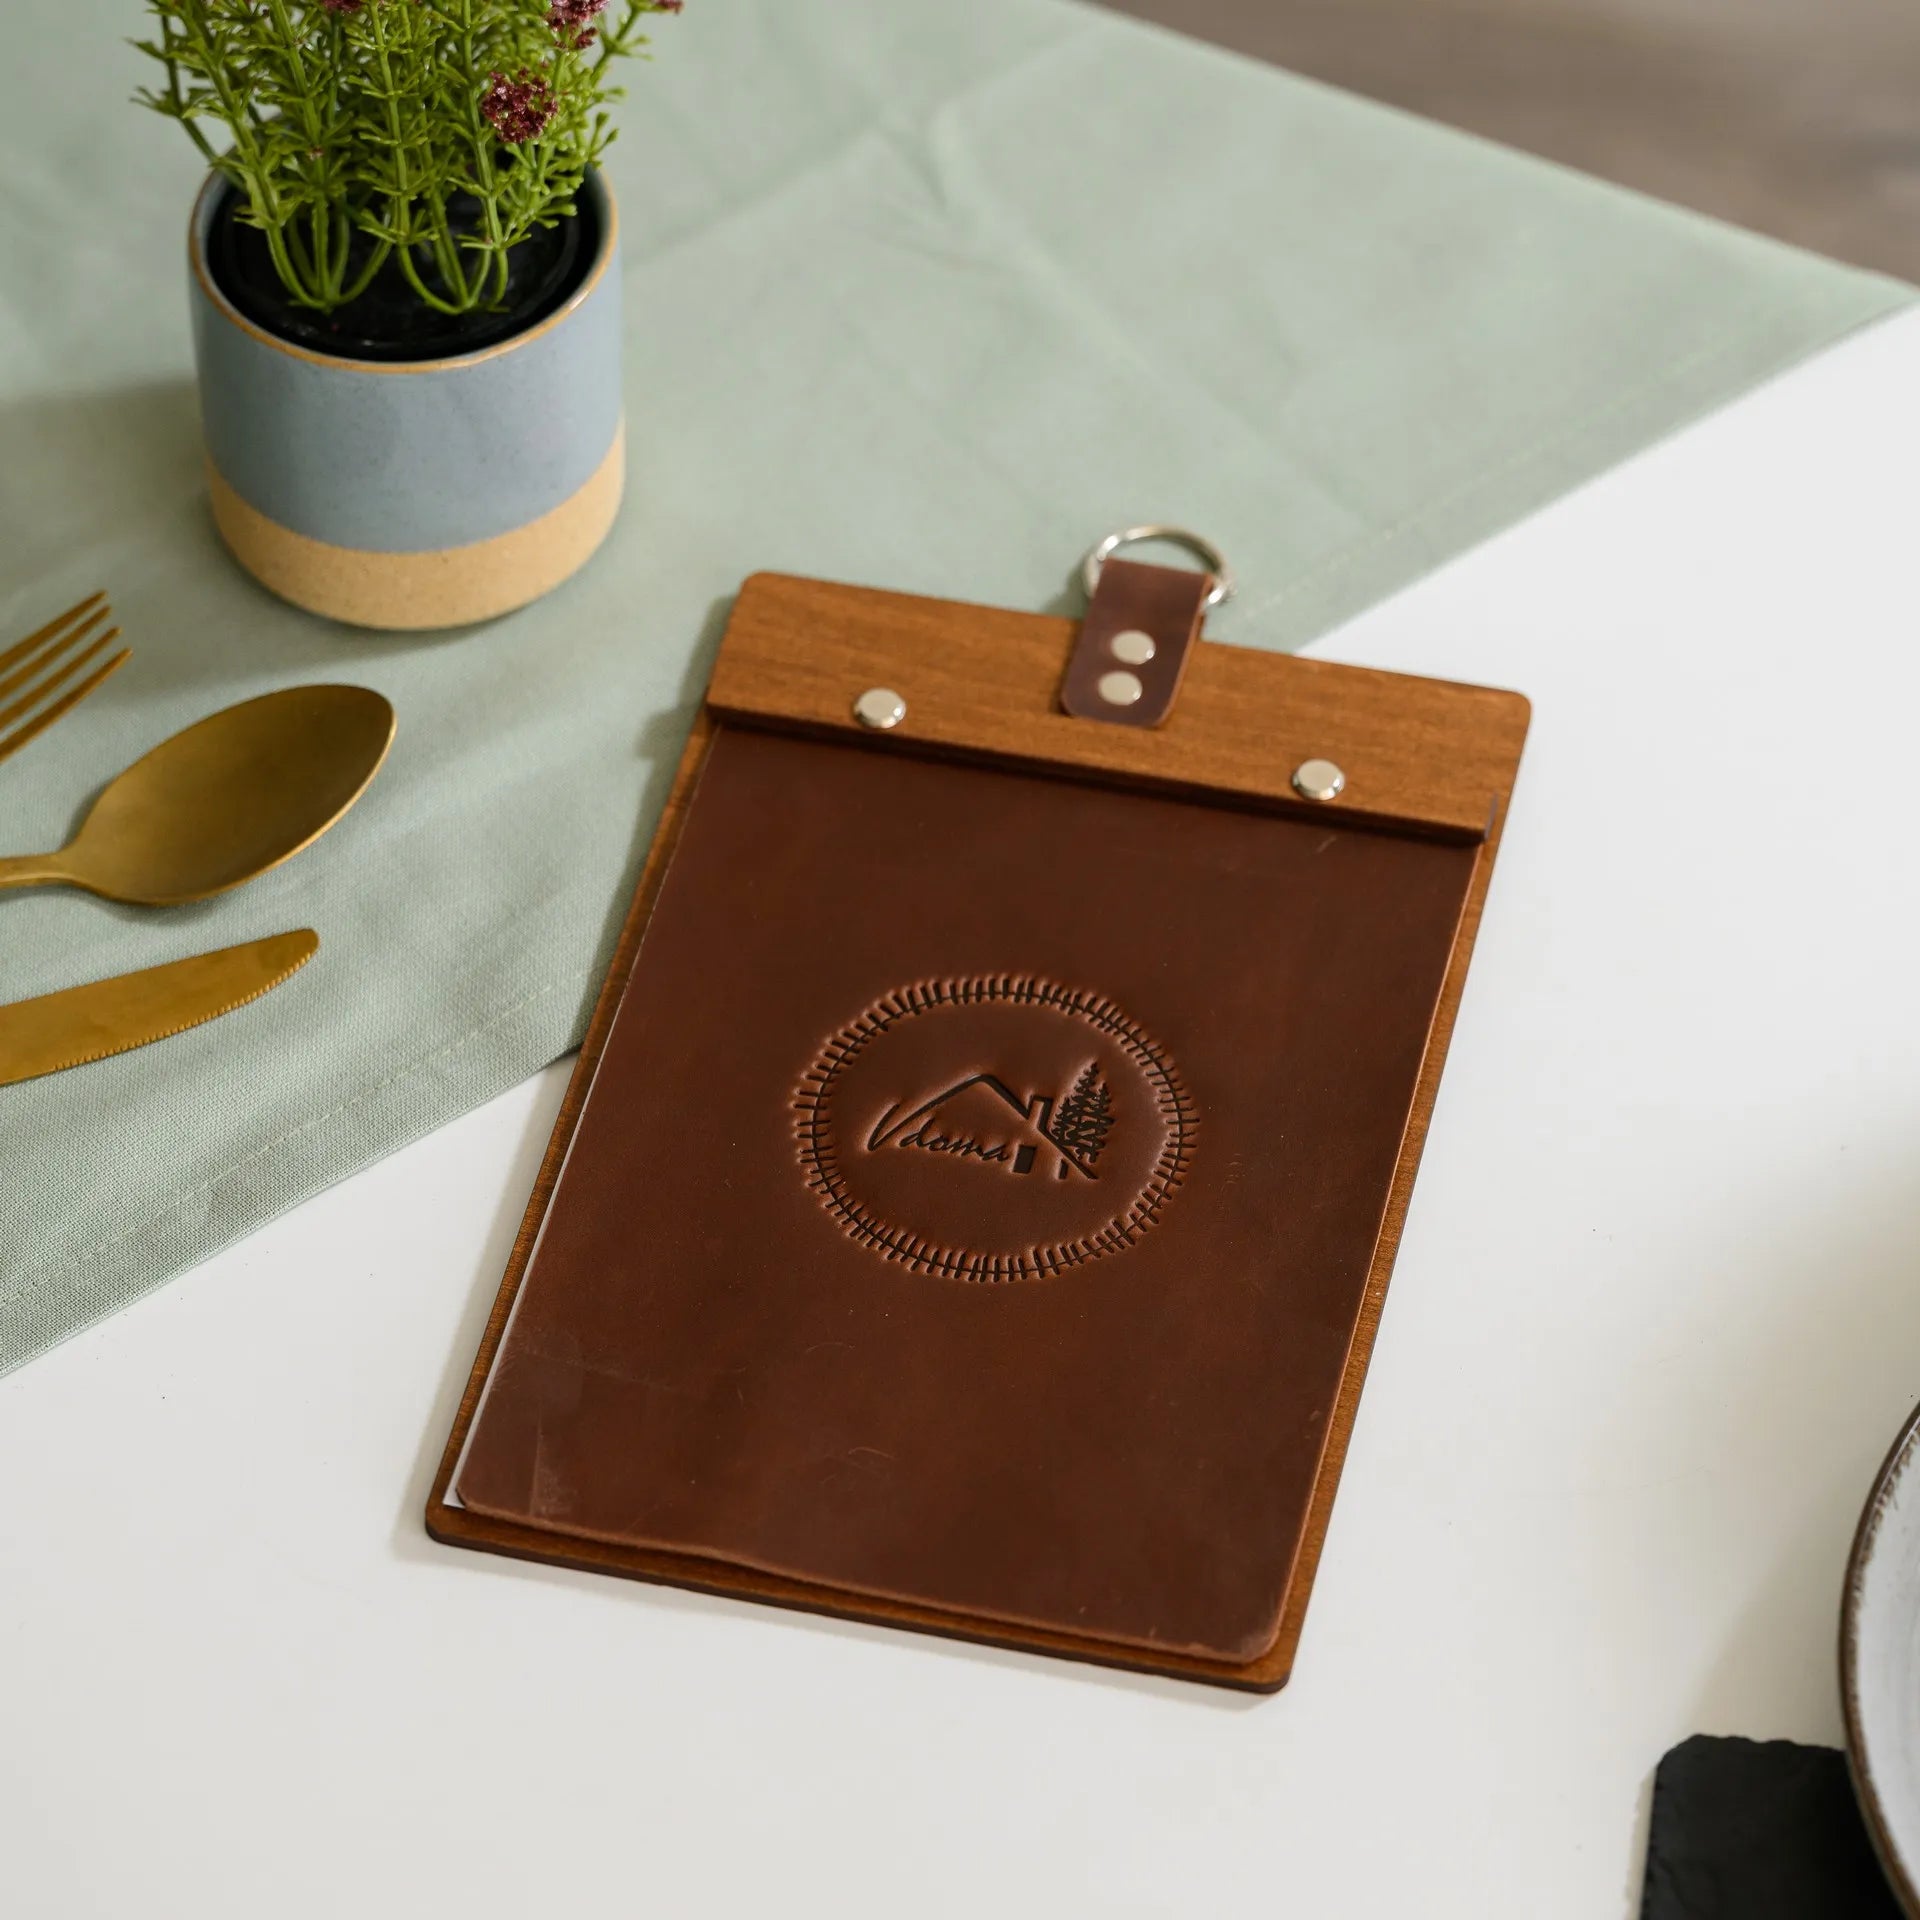 Wooden Menu Holder with Leather Cover: Elegant and durable presentation for menus.